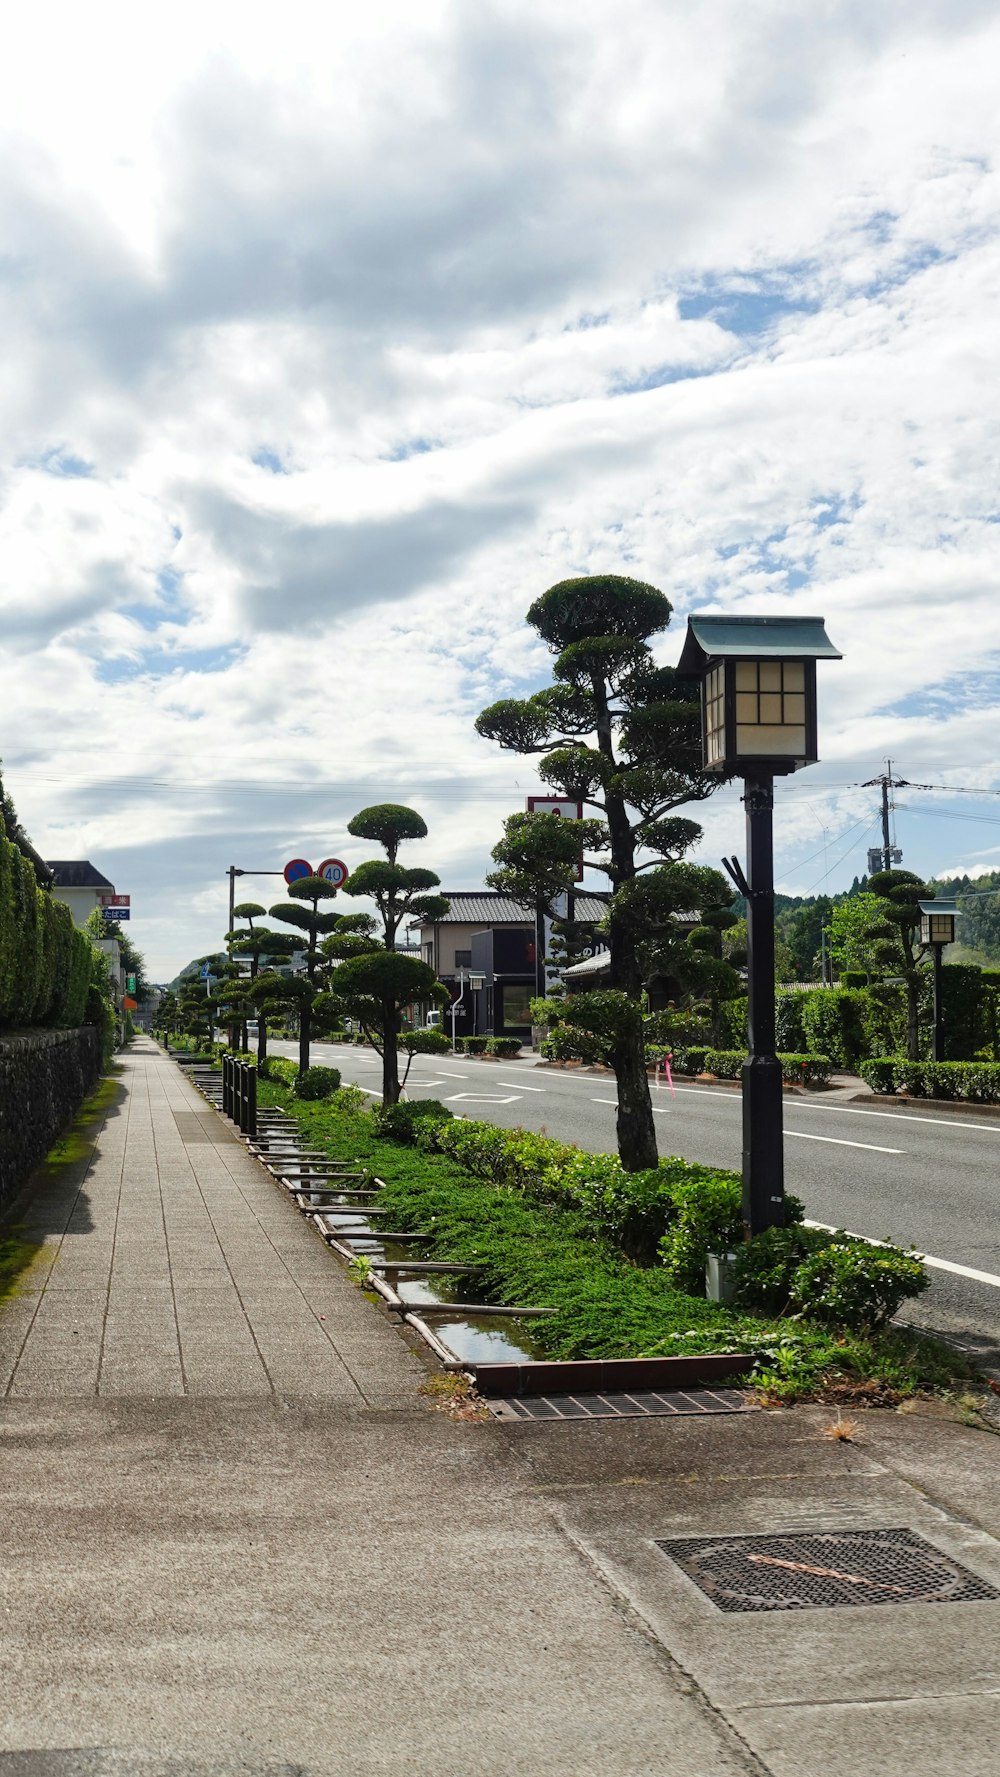 a street lined with trees and a lamp post